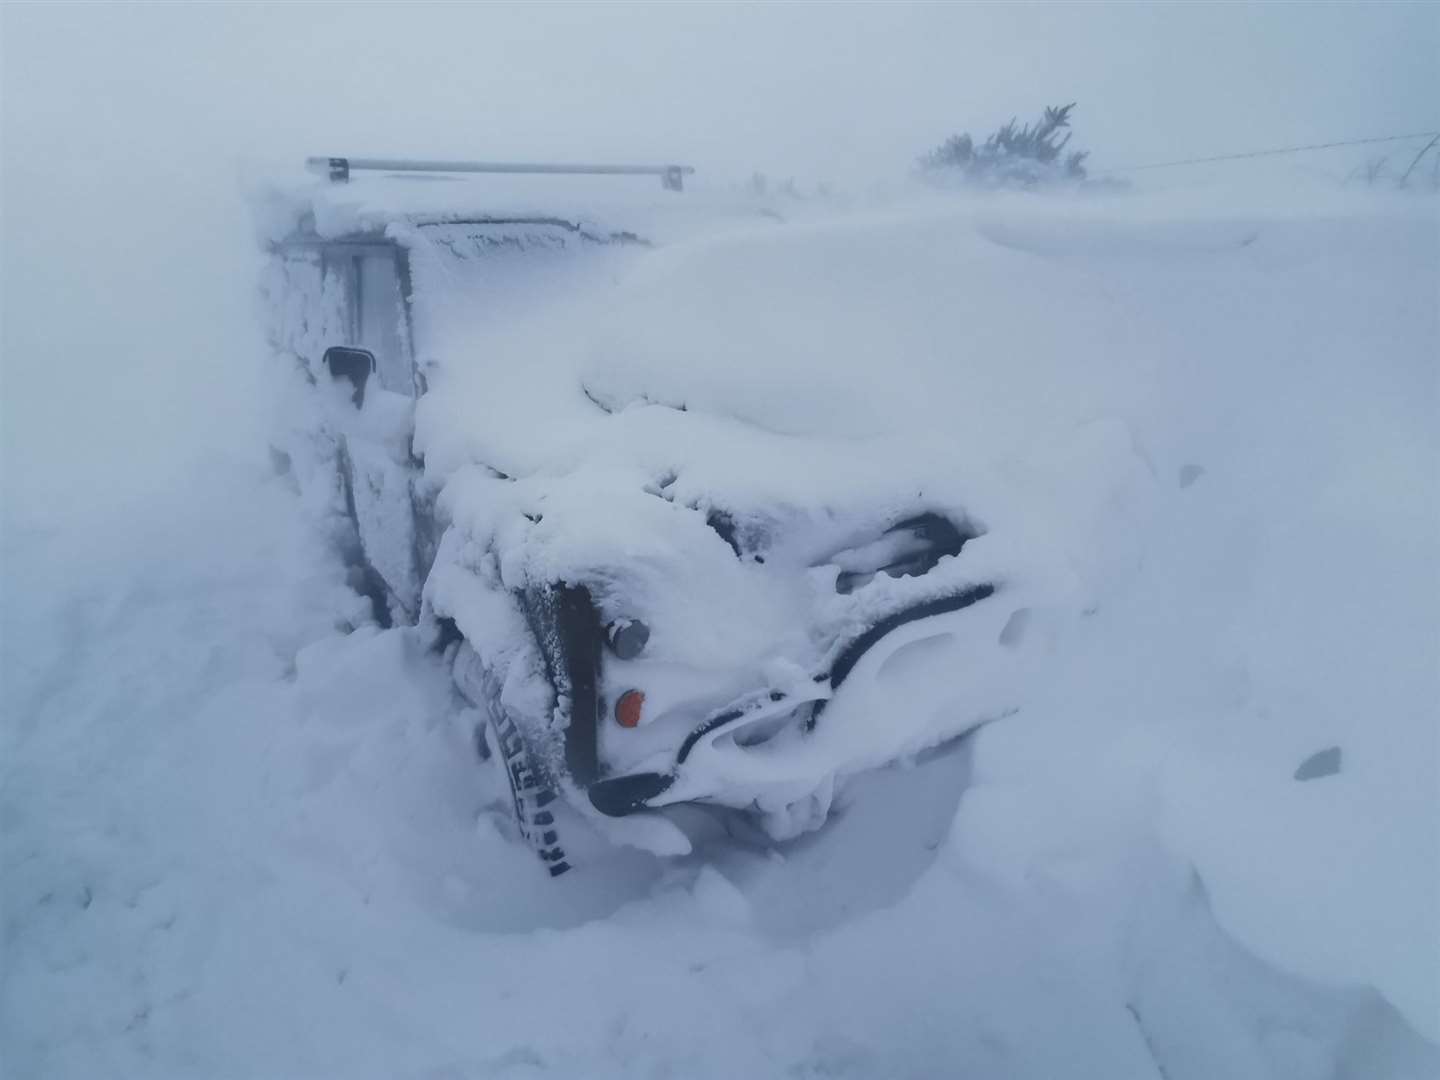 The Landrover when they first came across it. Less than an hour later it was almost entirely buried